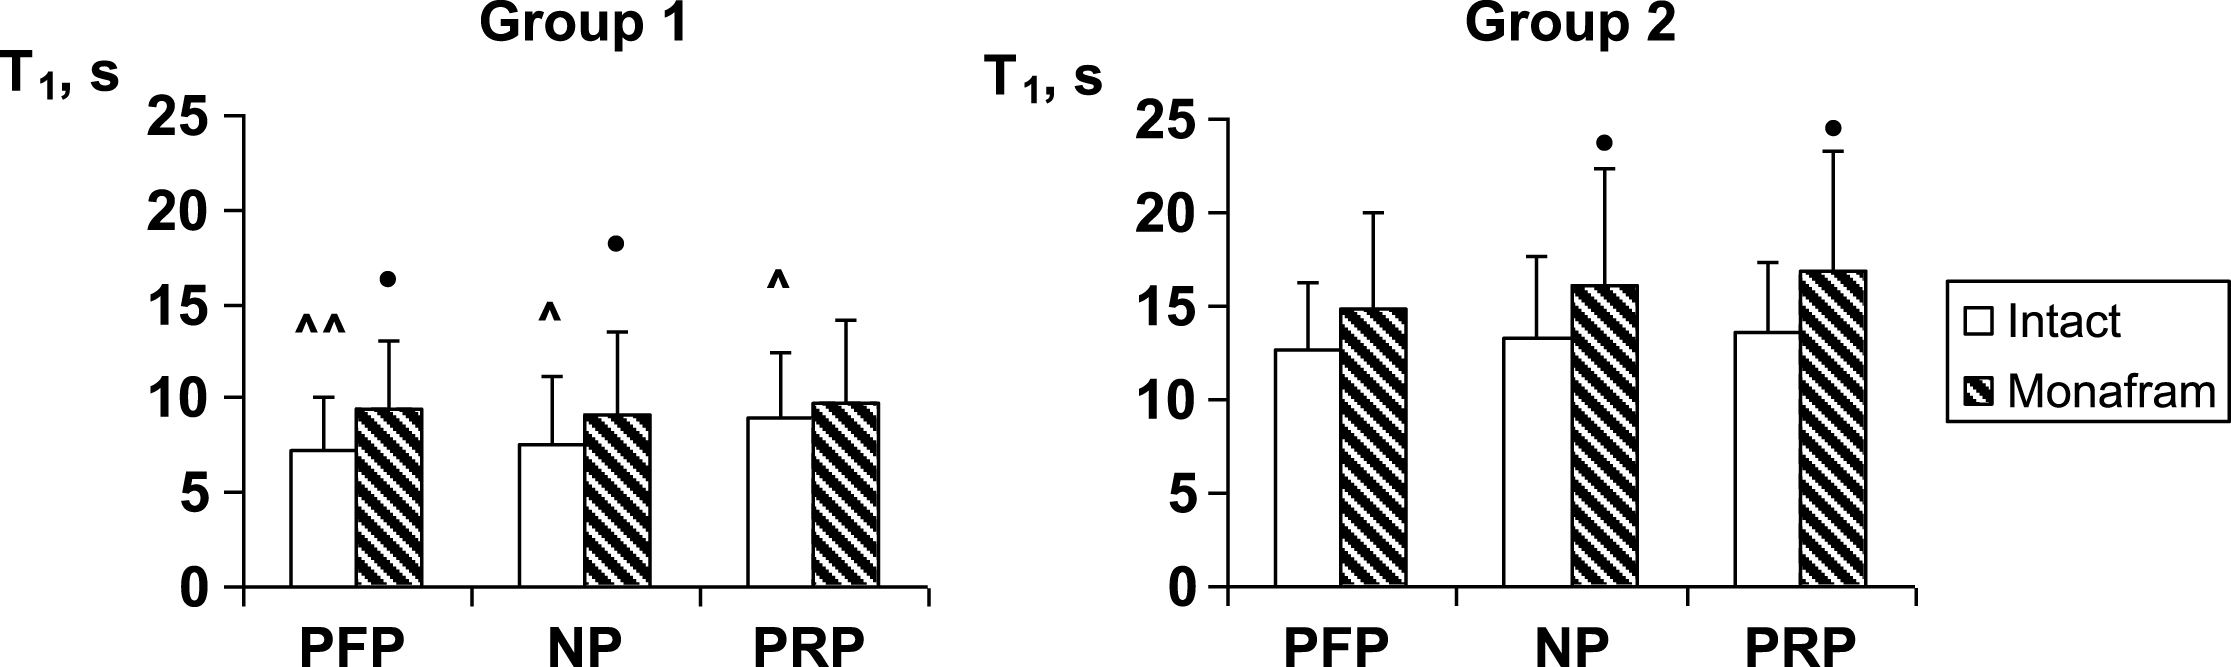 Influence of monafram on characteristic time of early RBC aggregation (T1) in platelet-free plasma (PFP), native plasma (NP), and platelet rich plasma (PRP) of healthy volunteers with “hyperaggregation” (Group 1, n = 6) and normal aggregation (Group 2, n = 12). Difference from intact samples, •p < 0.05 and difference from Group 2, ∧p < 0.05, ∧∧p < 0.01.